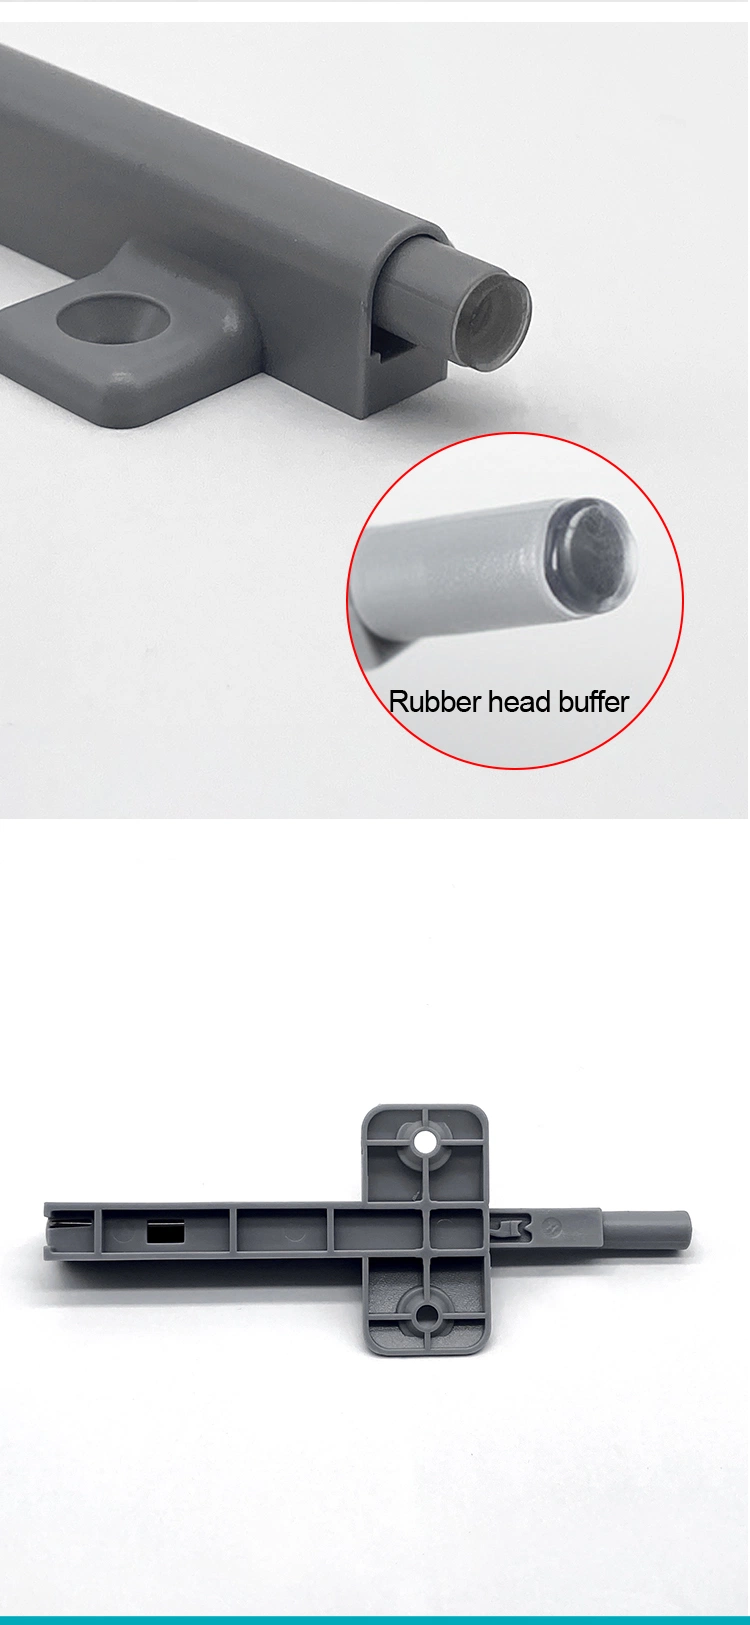 Cabinet Door Catches Magnetic Rebound Device Damper Buffer Push Open System